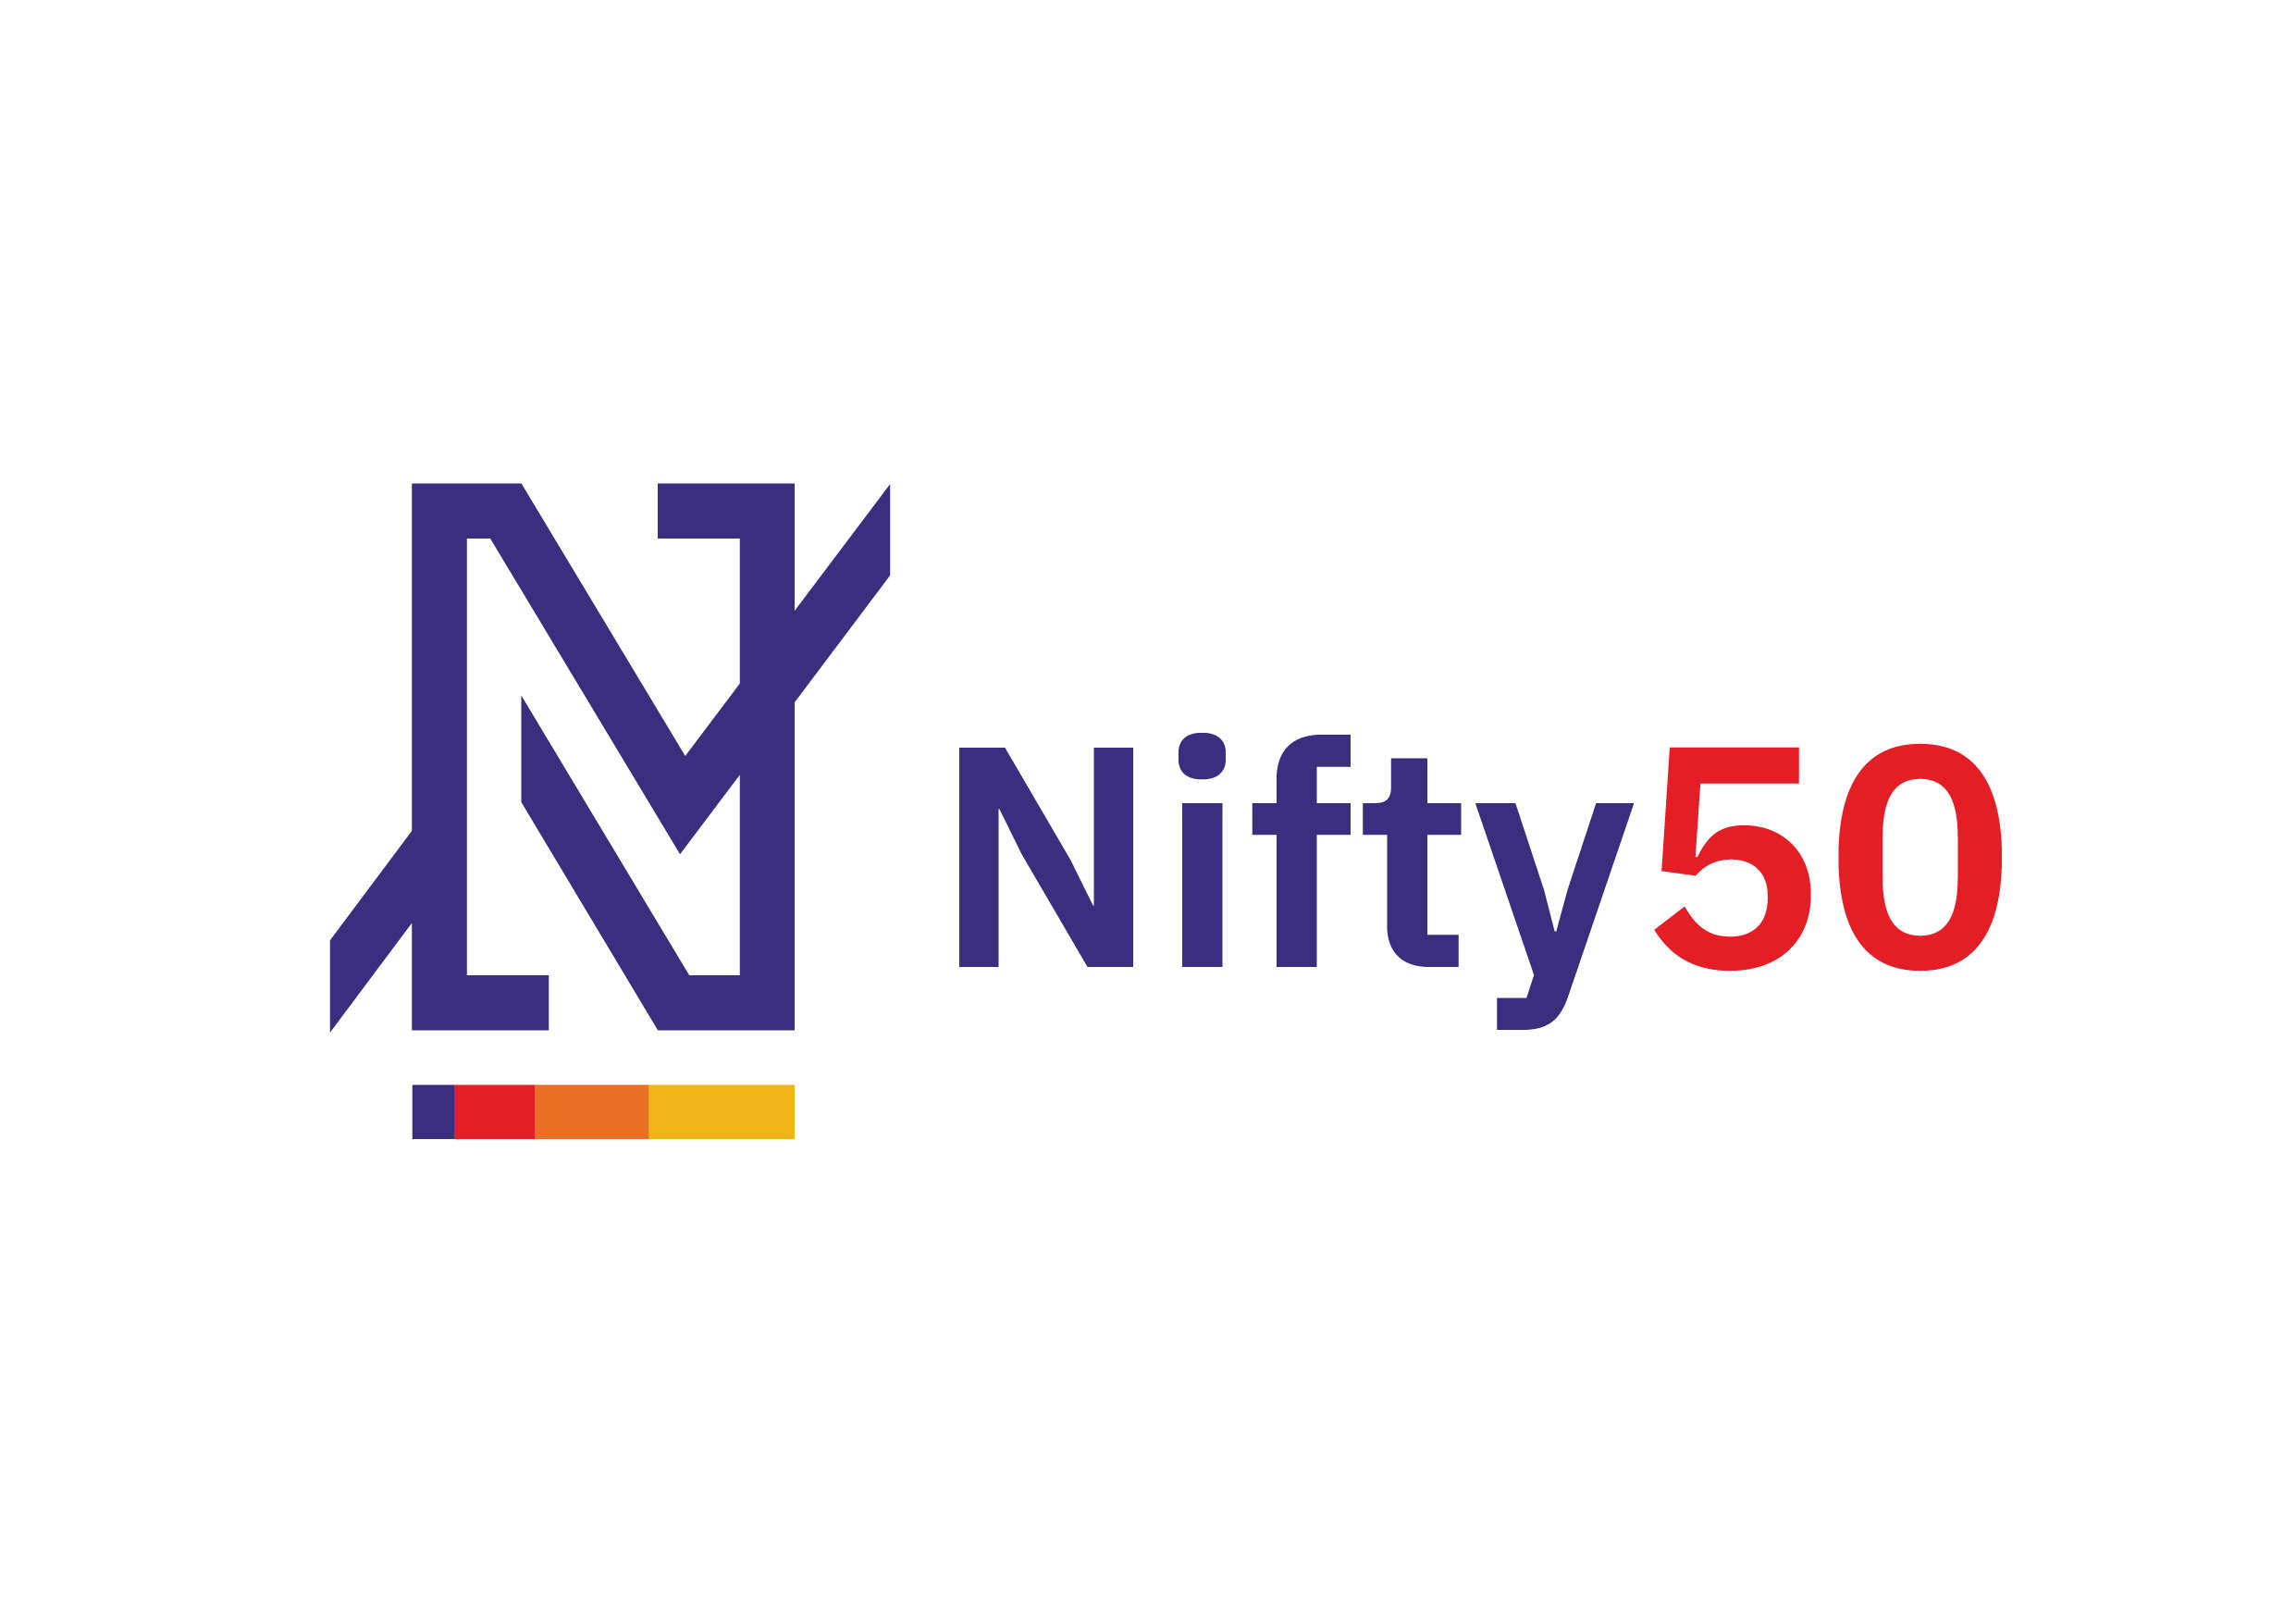 Live Trading Stock Market. NIFTY 50 ^ BANKNIFTY ^ STOCK's. - YouTube